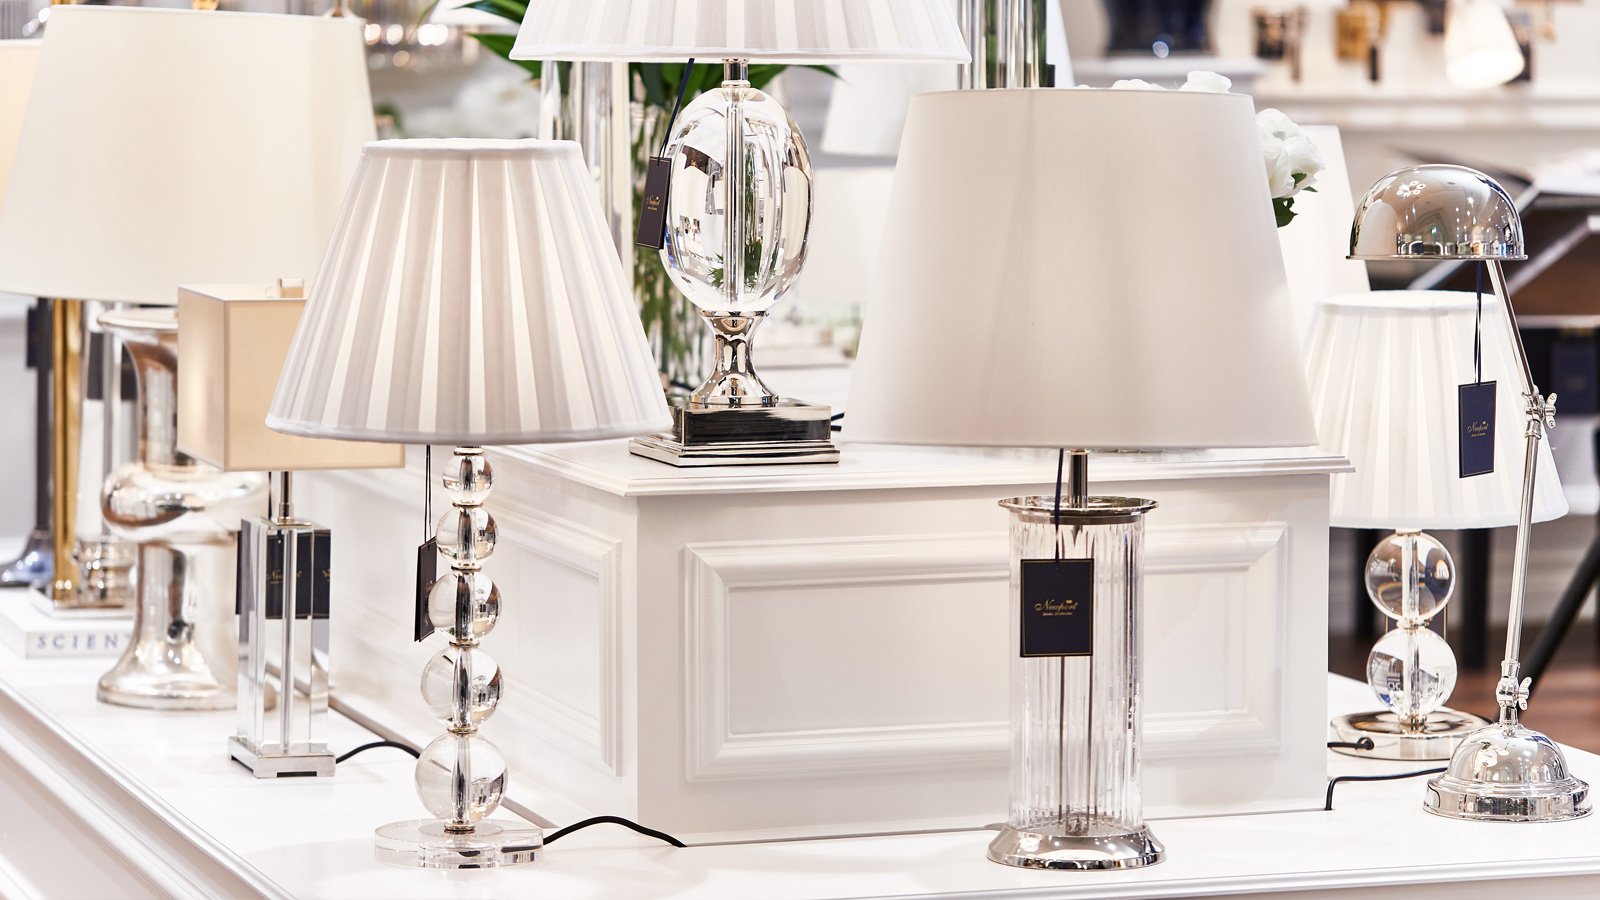 Lamps | Classic lamps in timeless designs